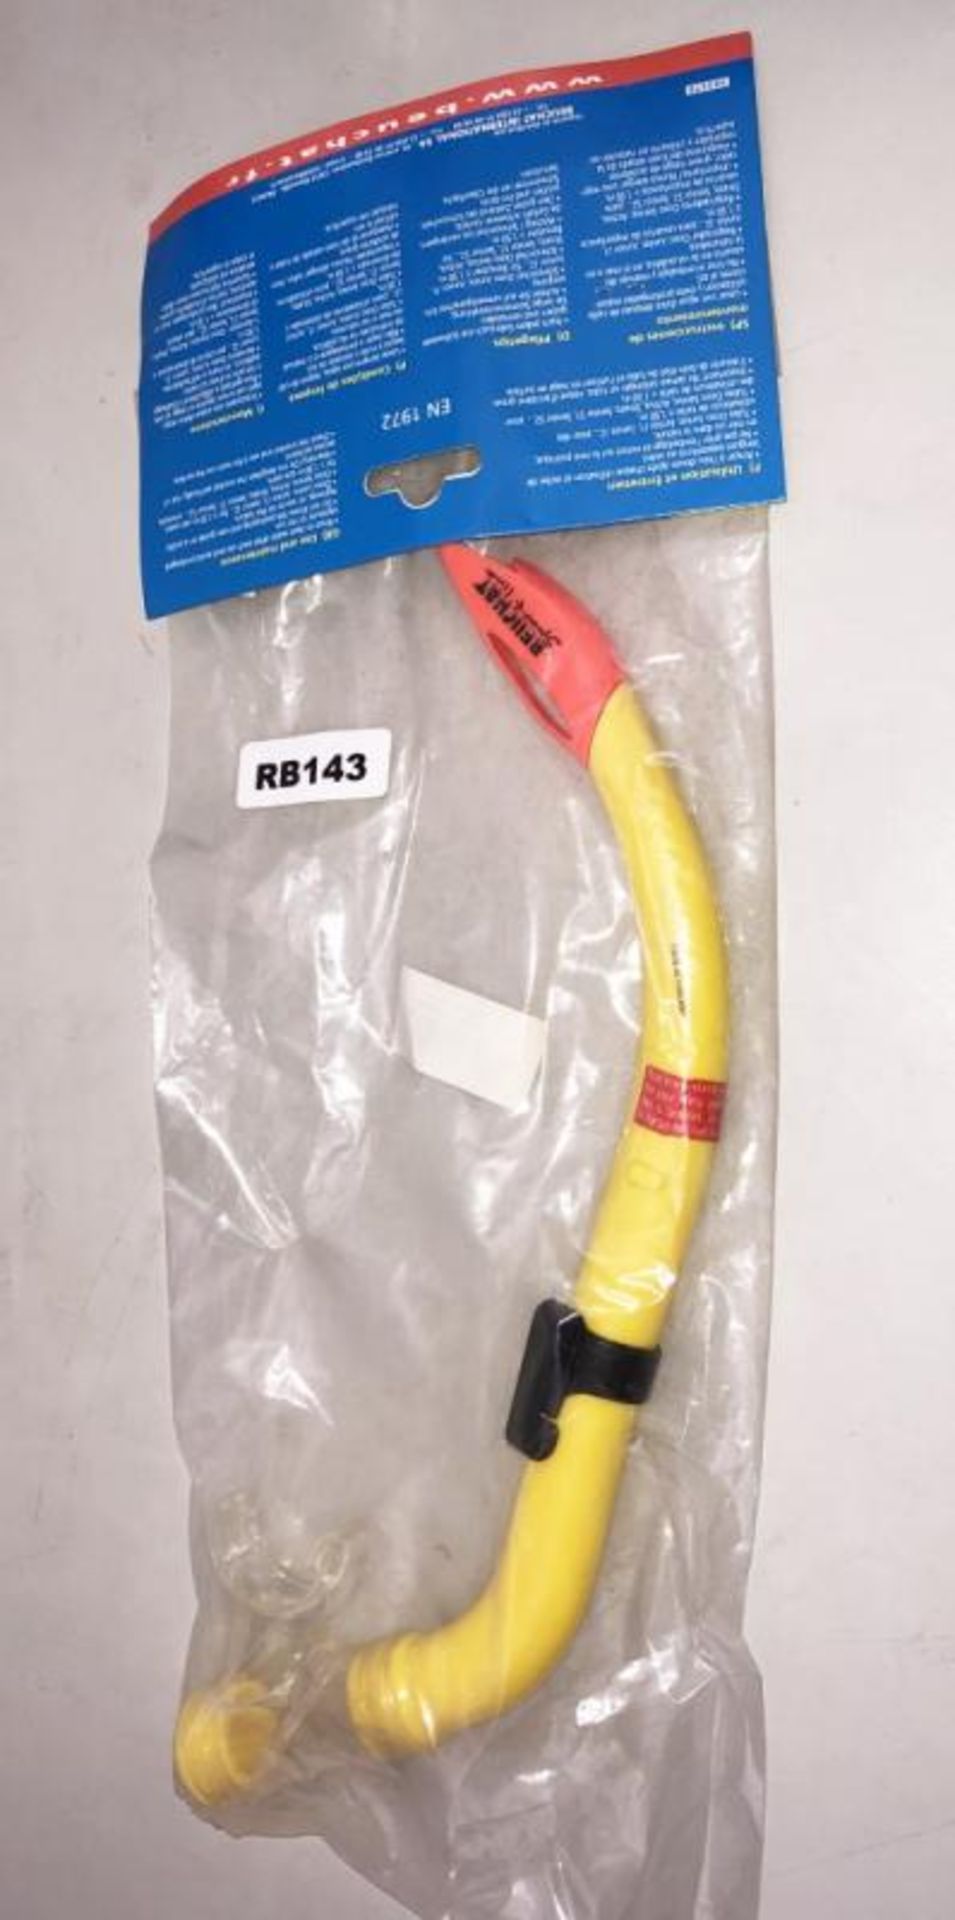 34 x Branded Diving Snorkel's - CL349 - Altrincham WA14 - Brand New! - Image 21 of 30